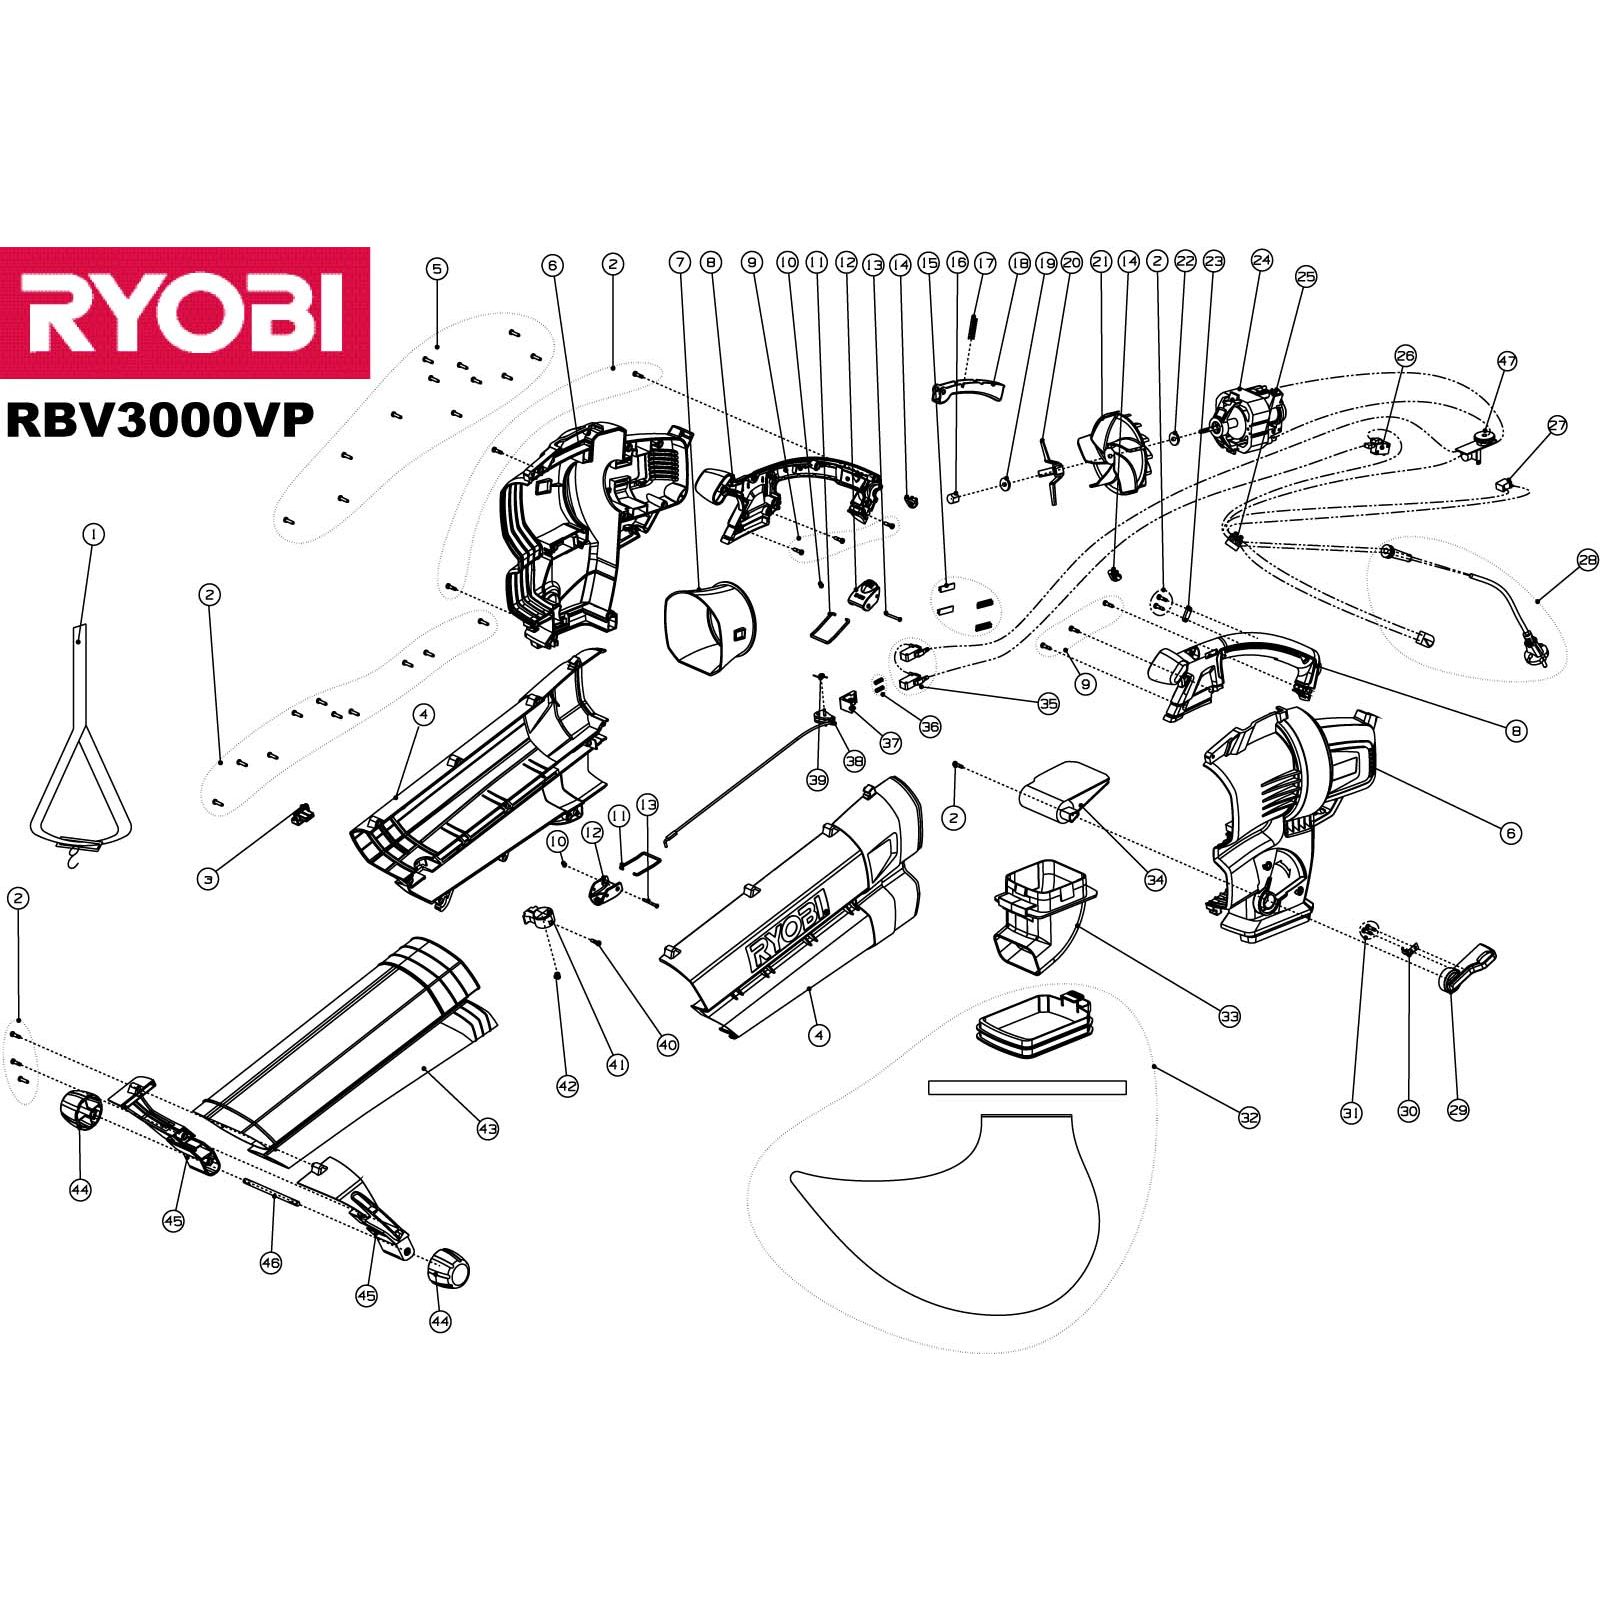 Buy A Ryobi Rbv3000vp Spare Part Or Replacement Part For Your Electric